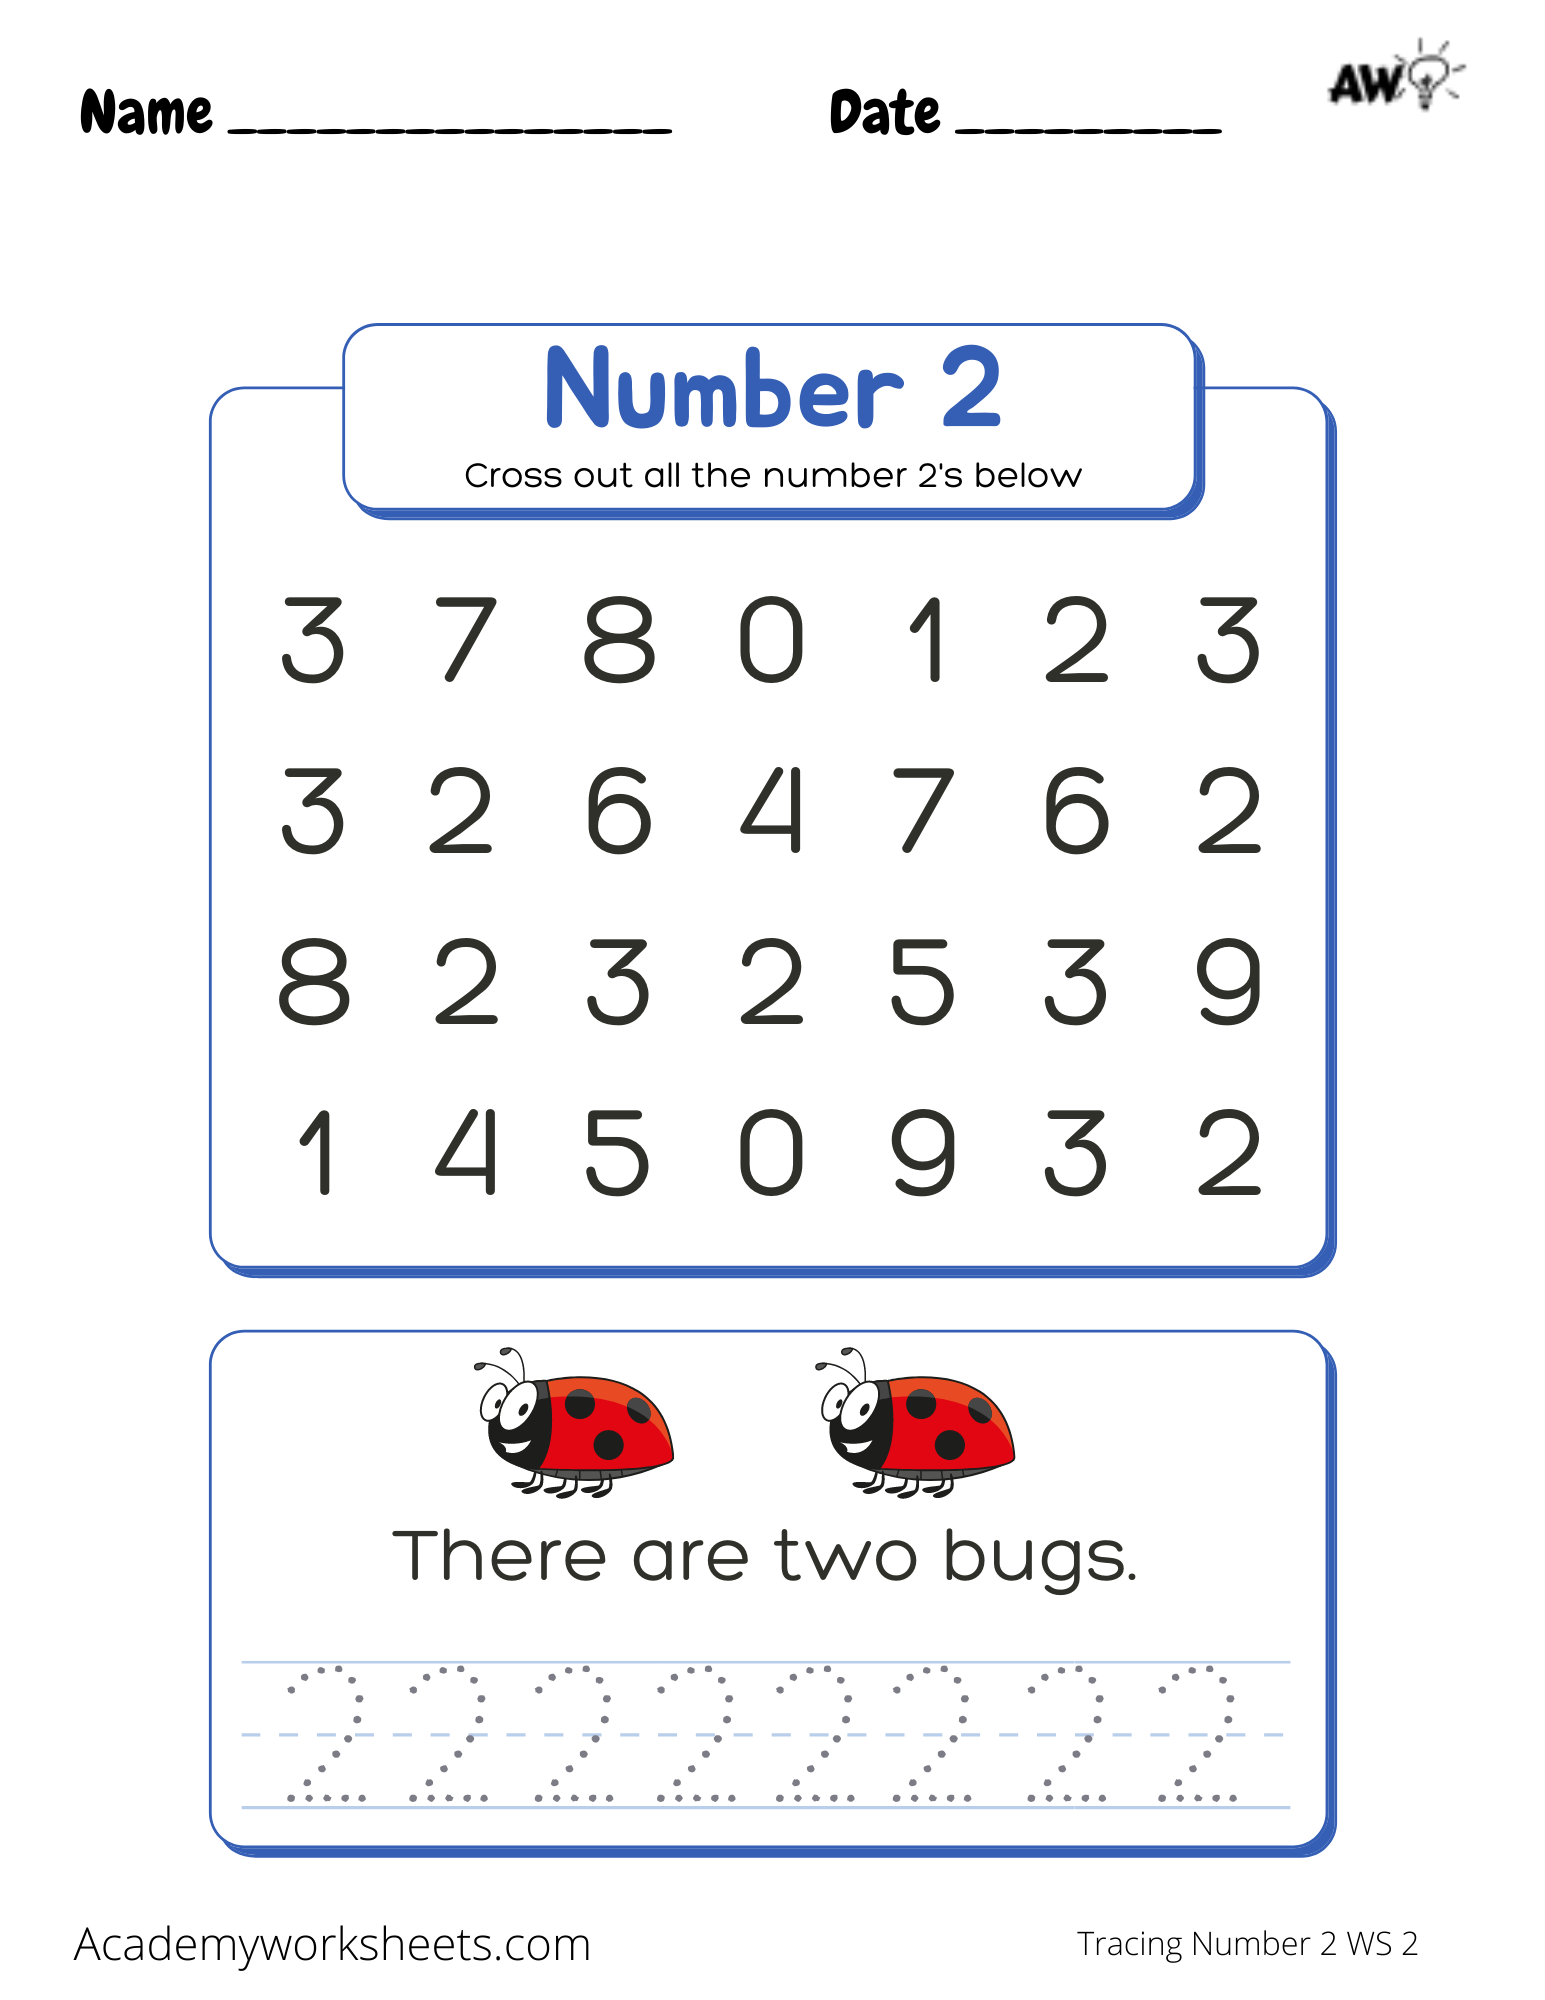 the-number-2-tracing-academy-worksheets